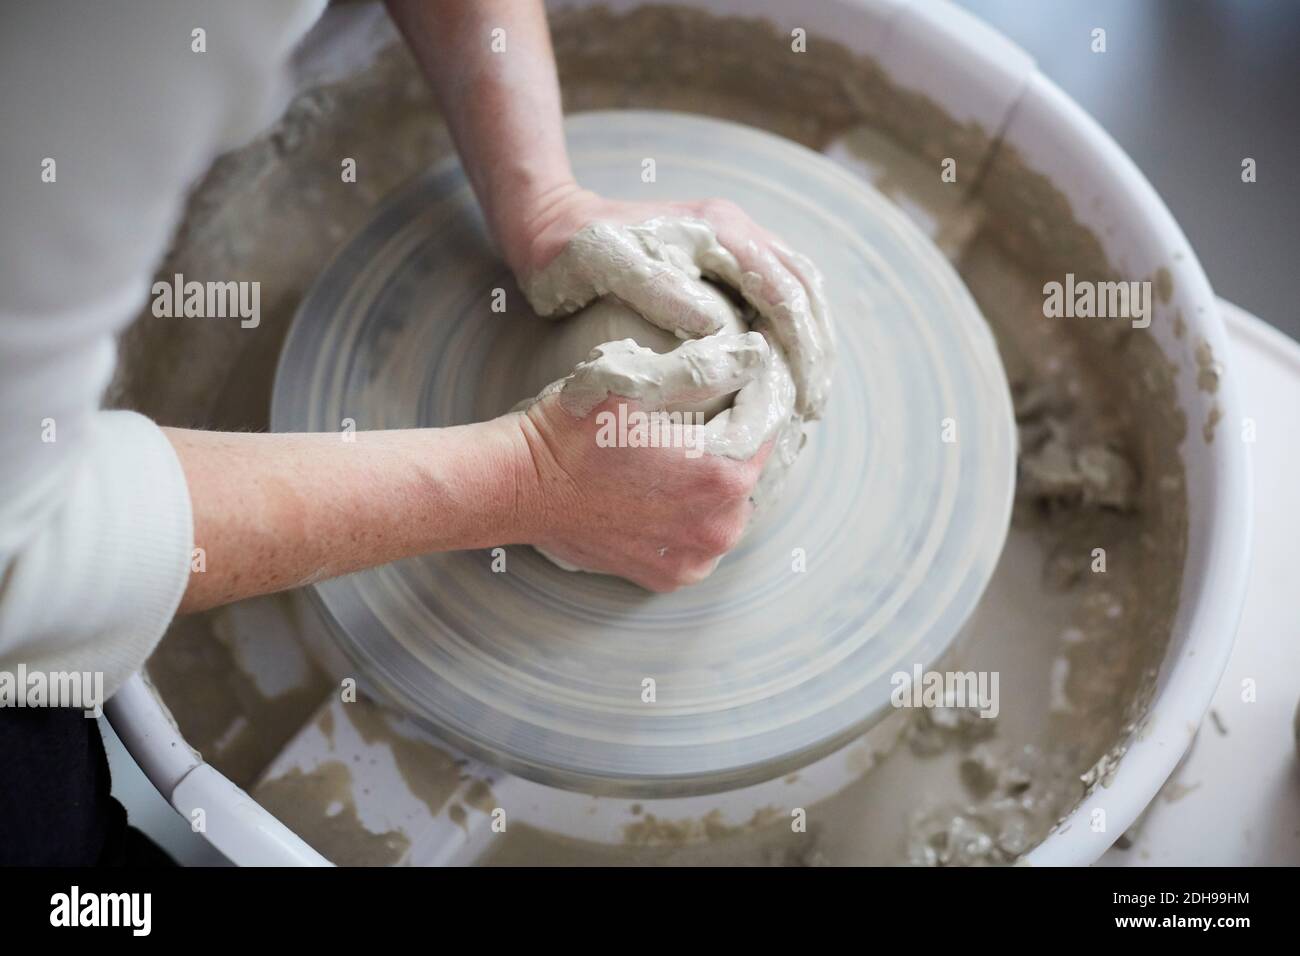 Cropped hands of woman molding pot in pottery class Stock Photo